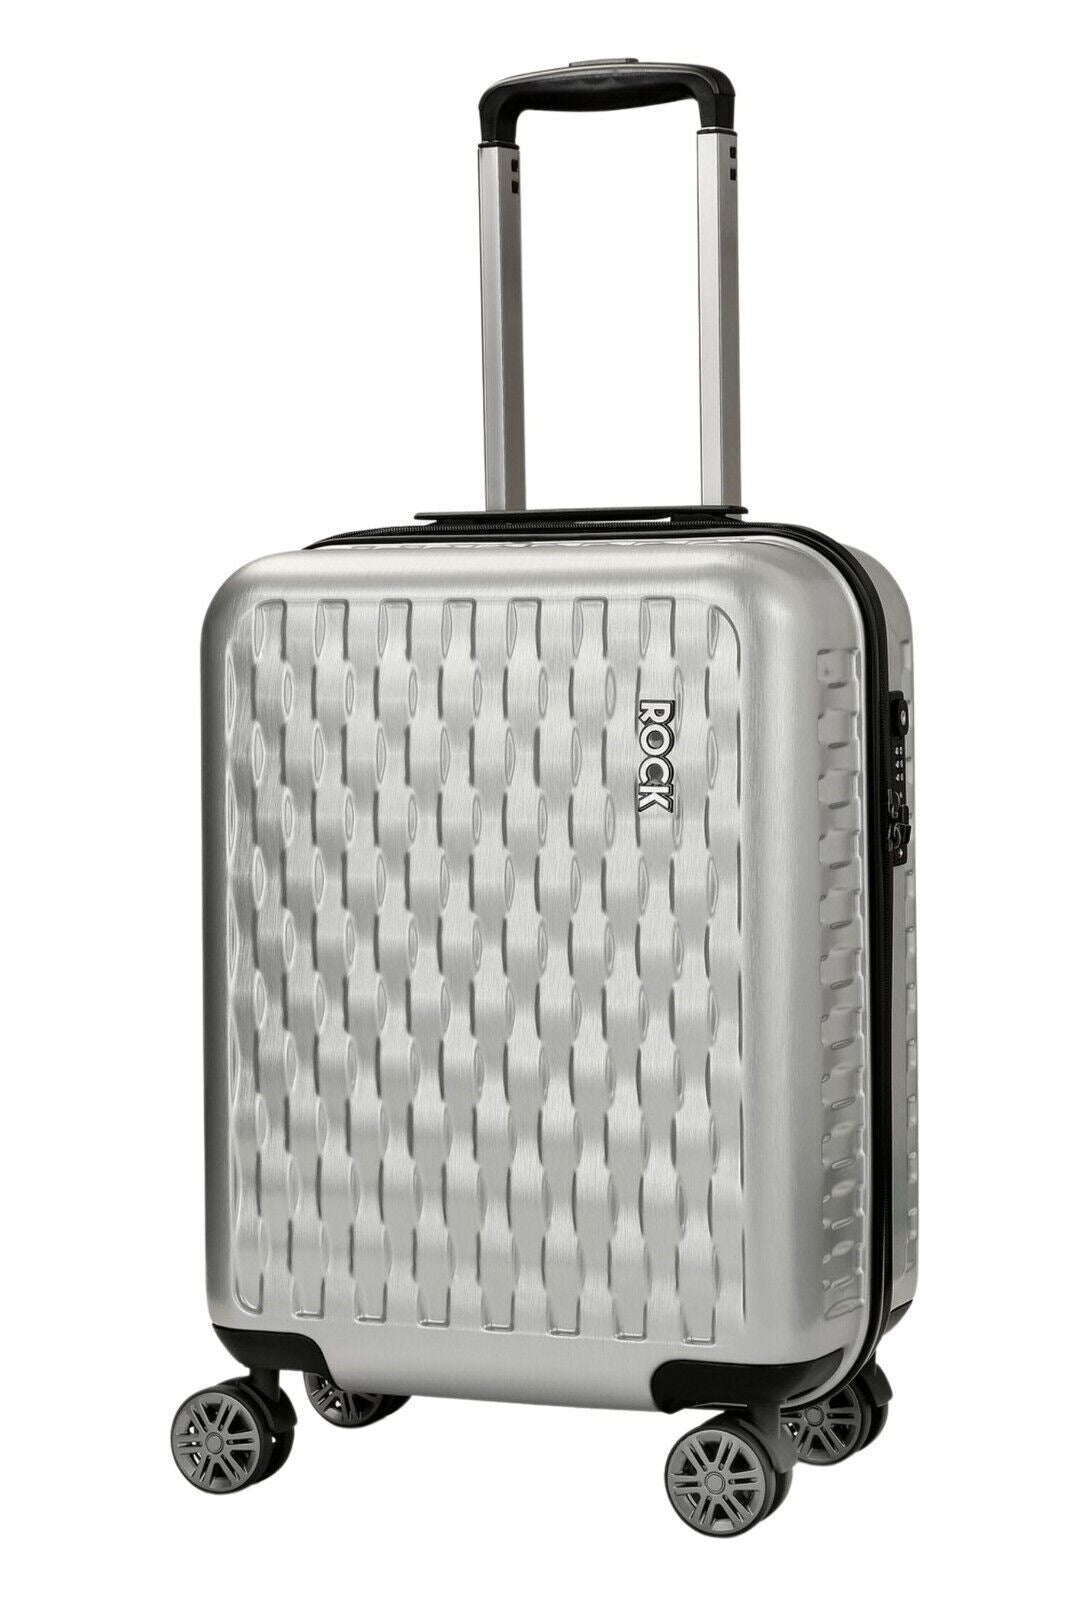 Hard Shell Silver Suitcase Set 8 Wheel Luggage Trolley Case Holiday Travel Bag